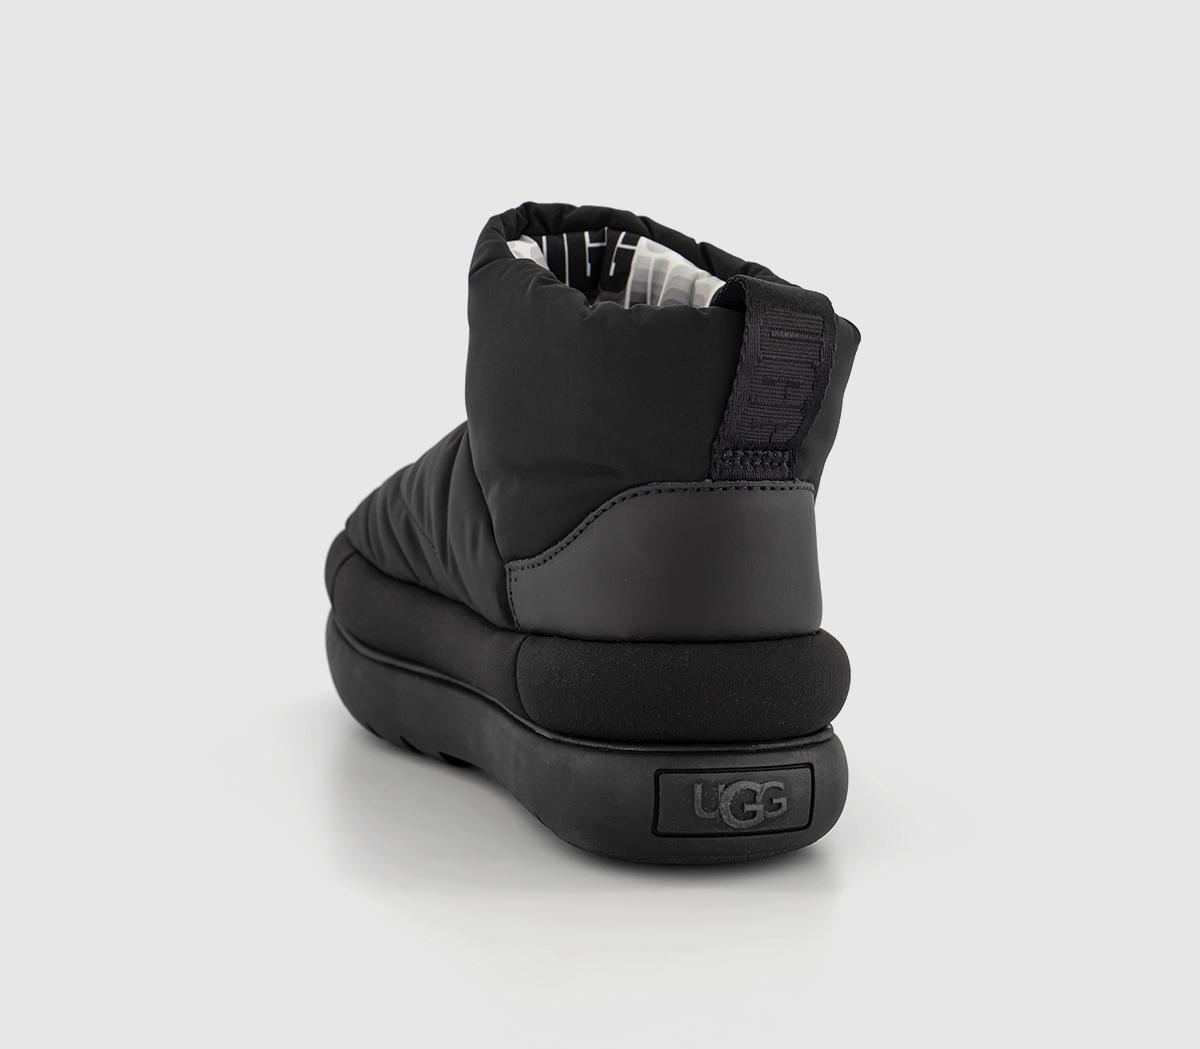 UGG Classic Maxi Mini Boots Black - Women's Ankle Boots